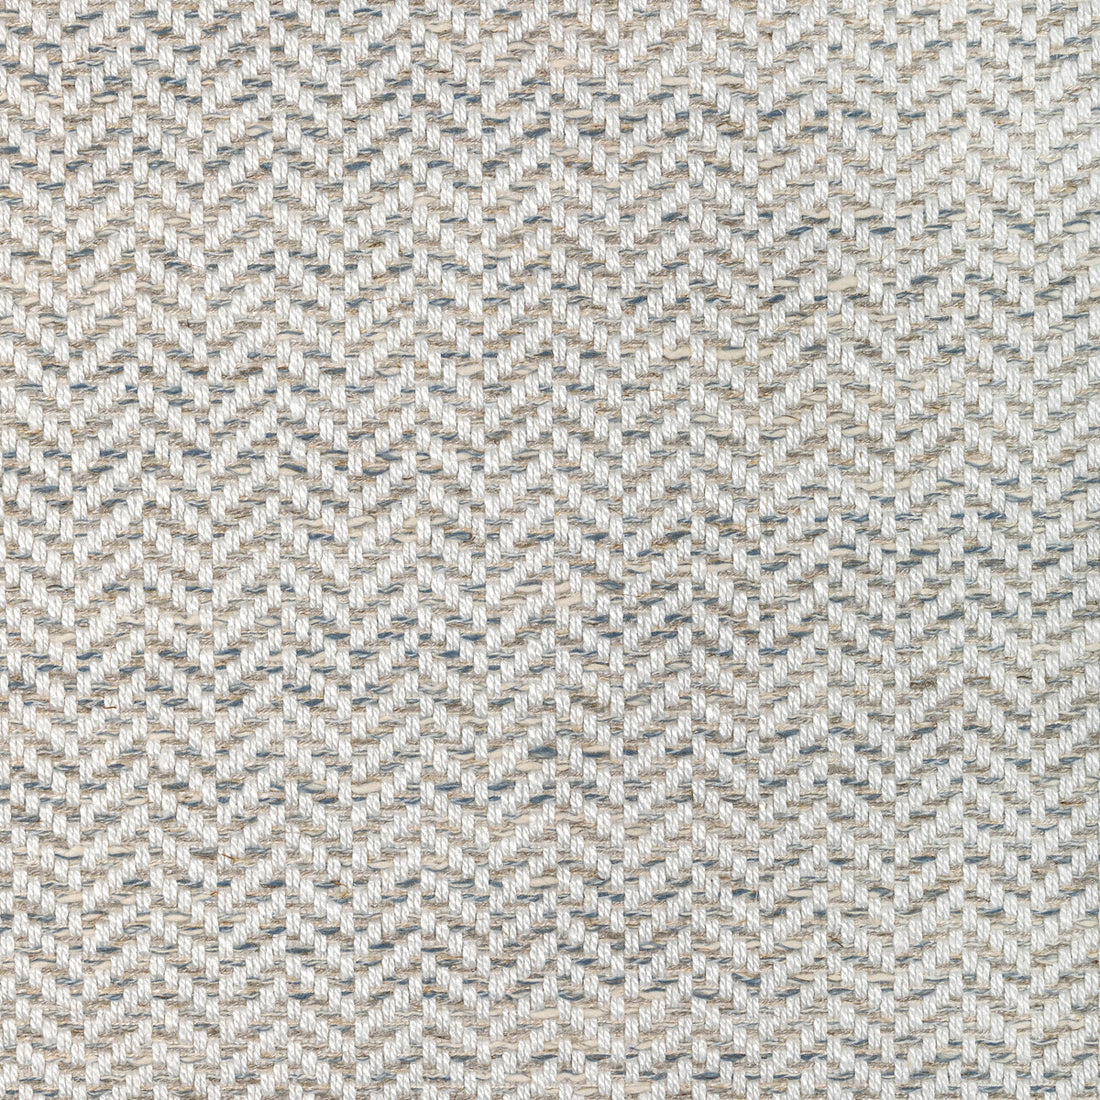 Verve Weave fabric in chambray color - pattern 36358.1516.0 - by Kravet Couture in the Corey Damen Jenkins Trad Nouveau collection